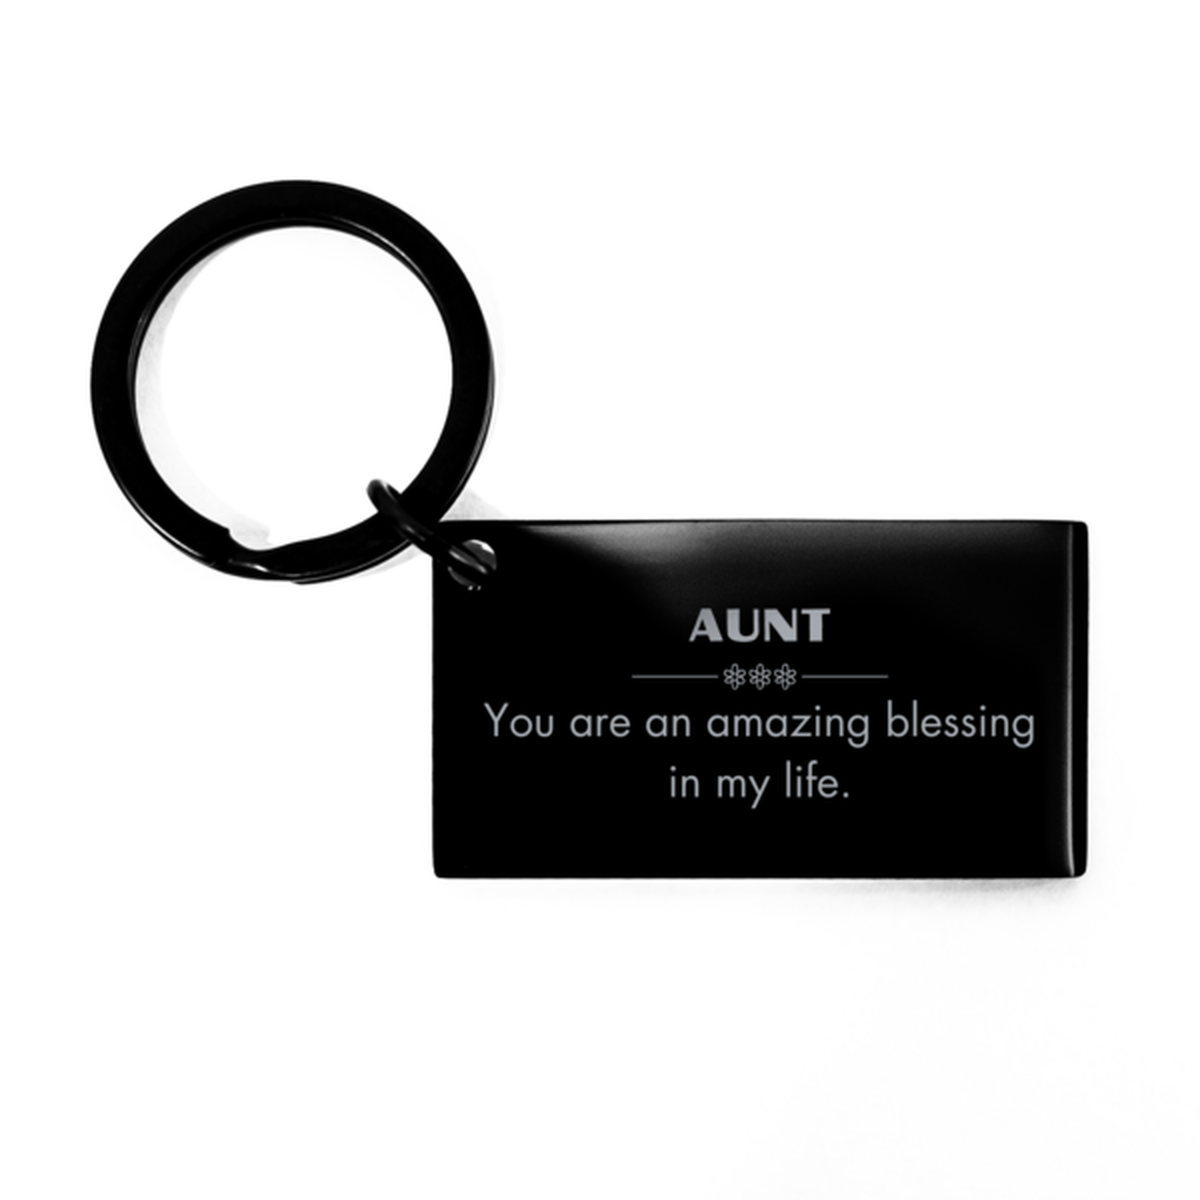 Aunt Keychain, You are an amazing blessing in my life, Thank You Gifts For Aunt, Inspirational Birthday Christmas Unique Gifts For Aunt